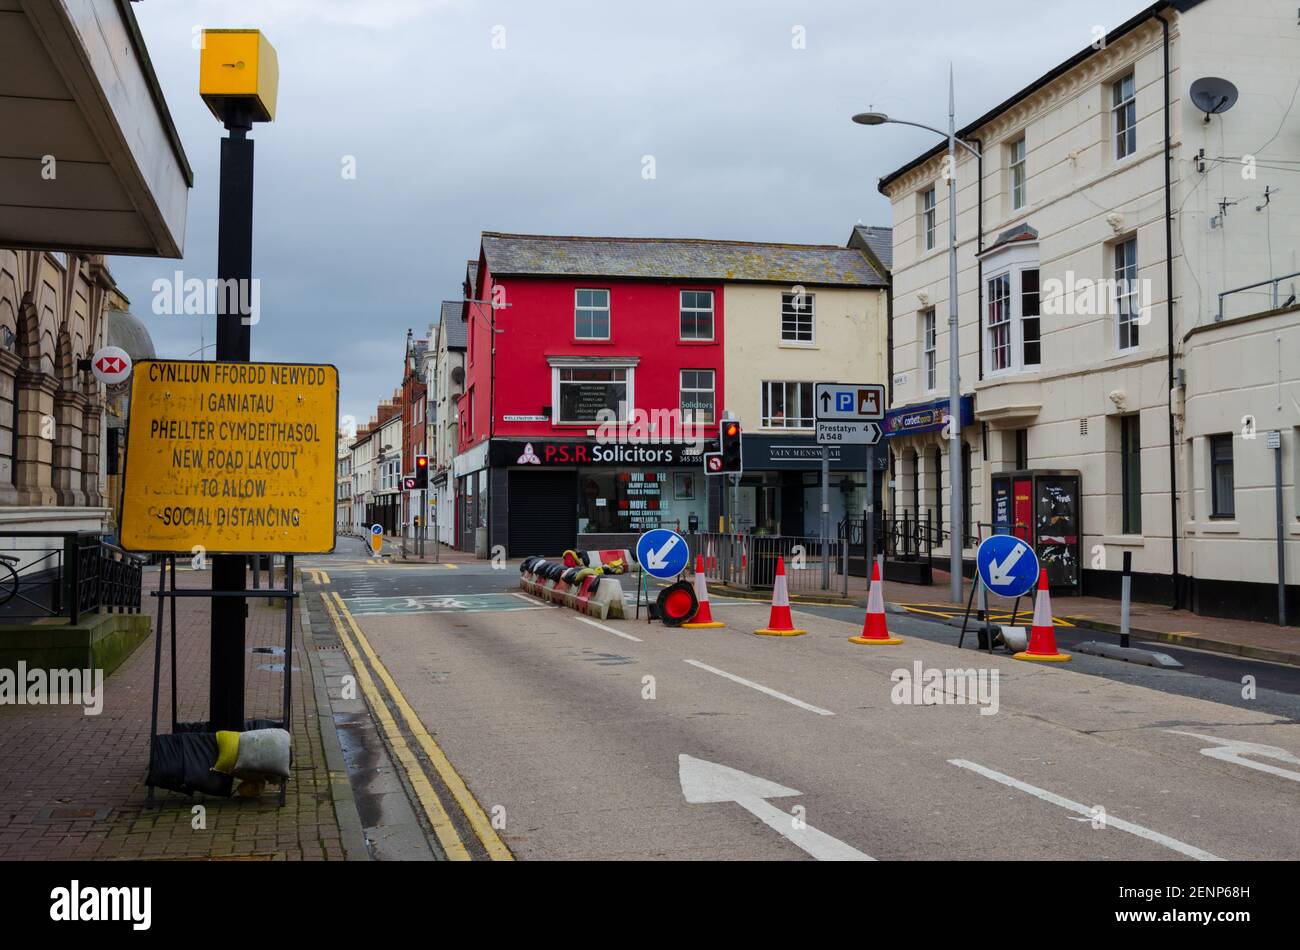 Rhyl, Denbighshire; UK: Feb 21, 2021: Signage for a new road layout to allow social distancing on Bodfor Street. Stock Photo